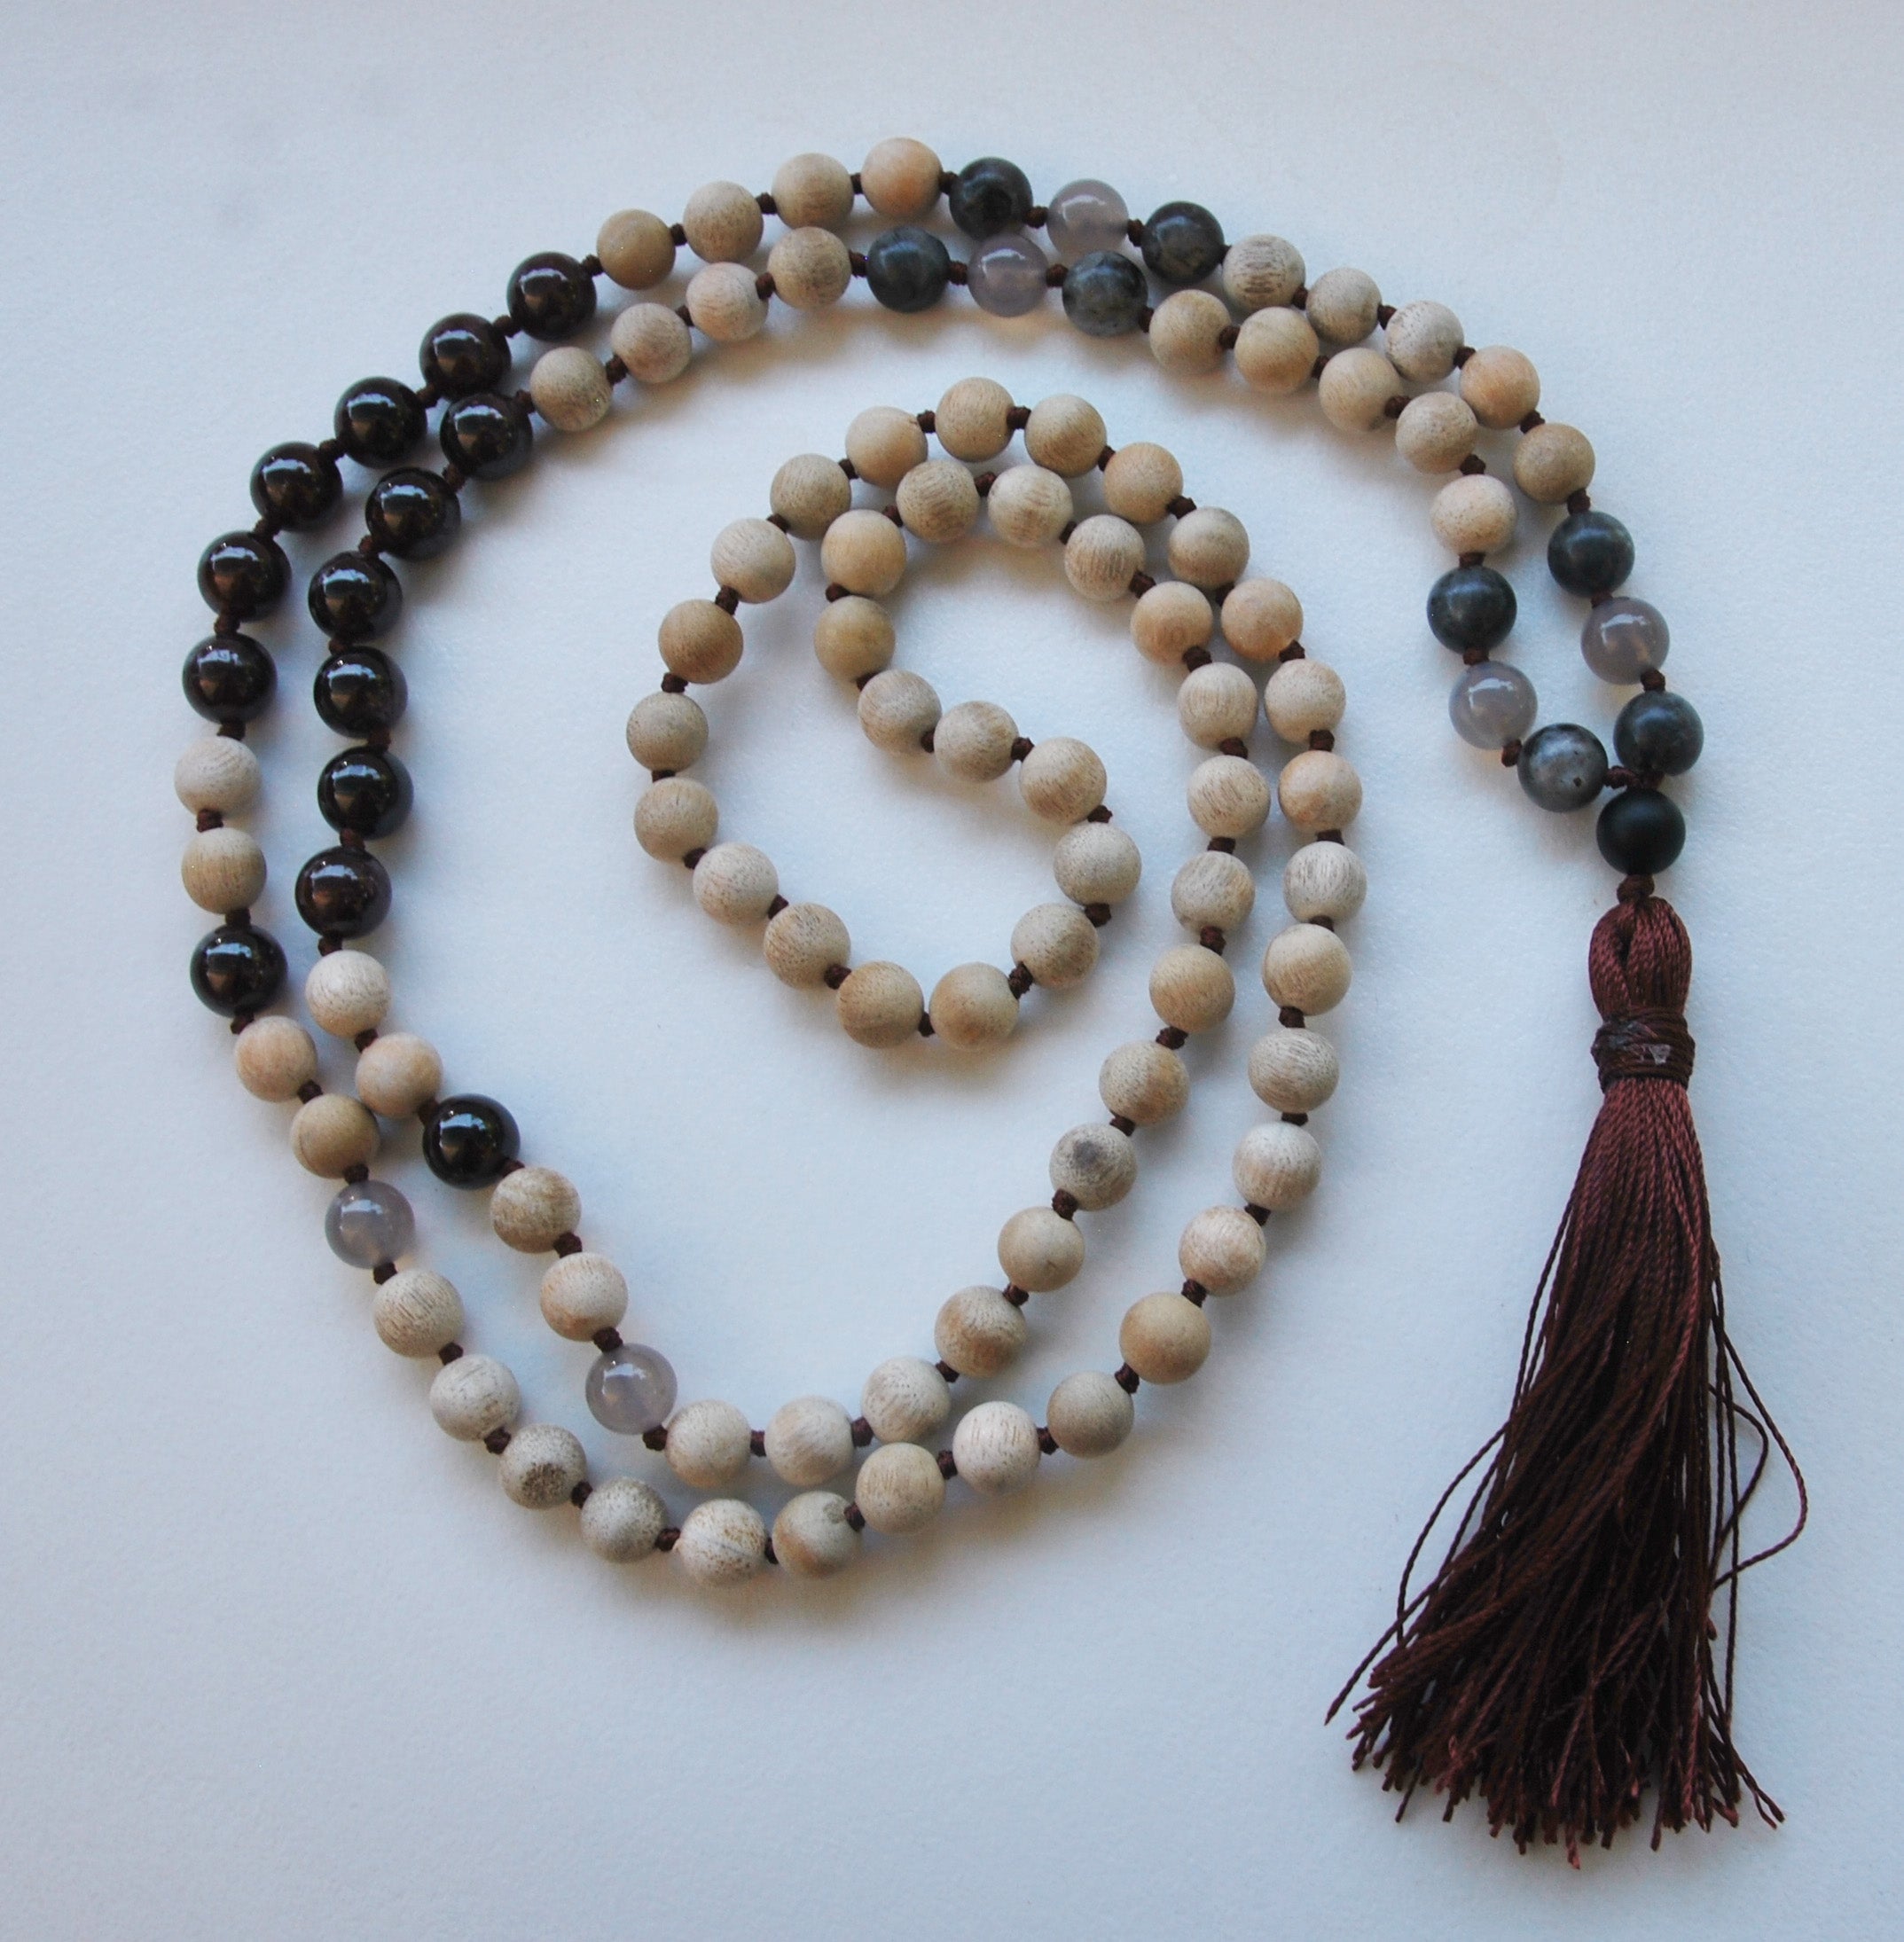 8mm Sandalwood & Garnet 108 Knotted Mala Necklace with Colored Tassel